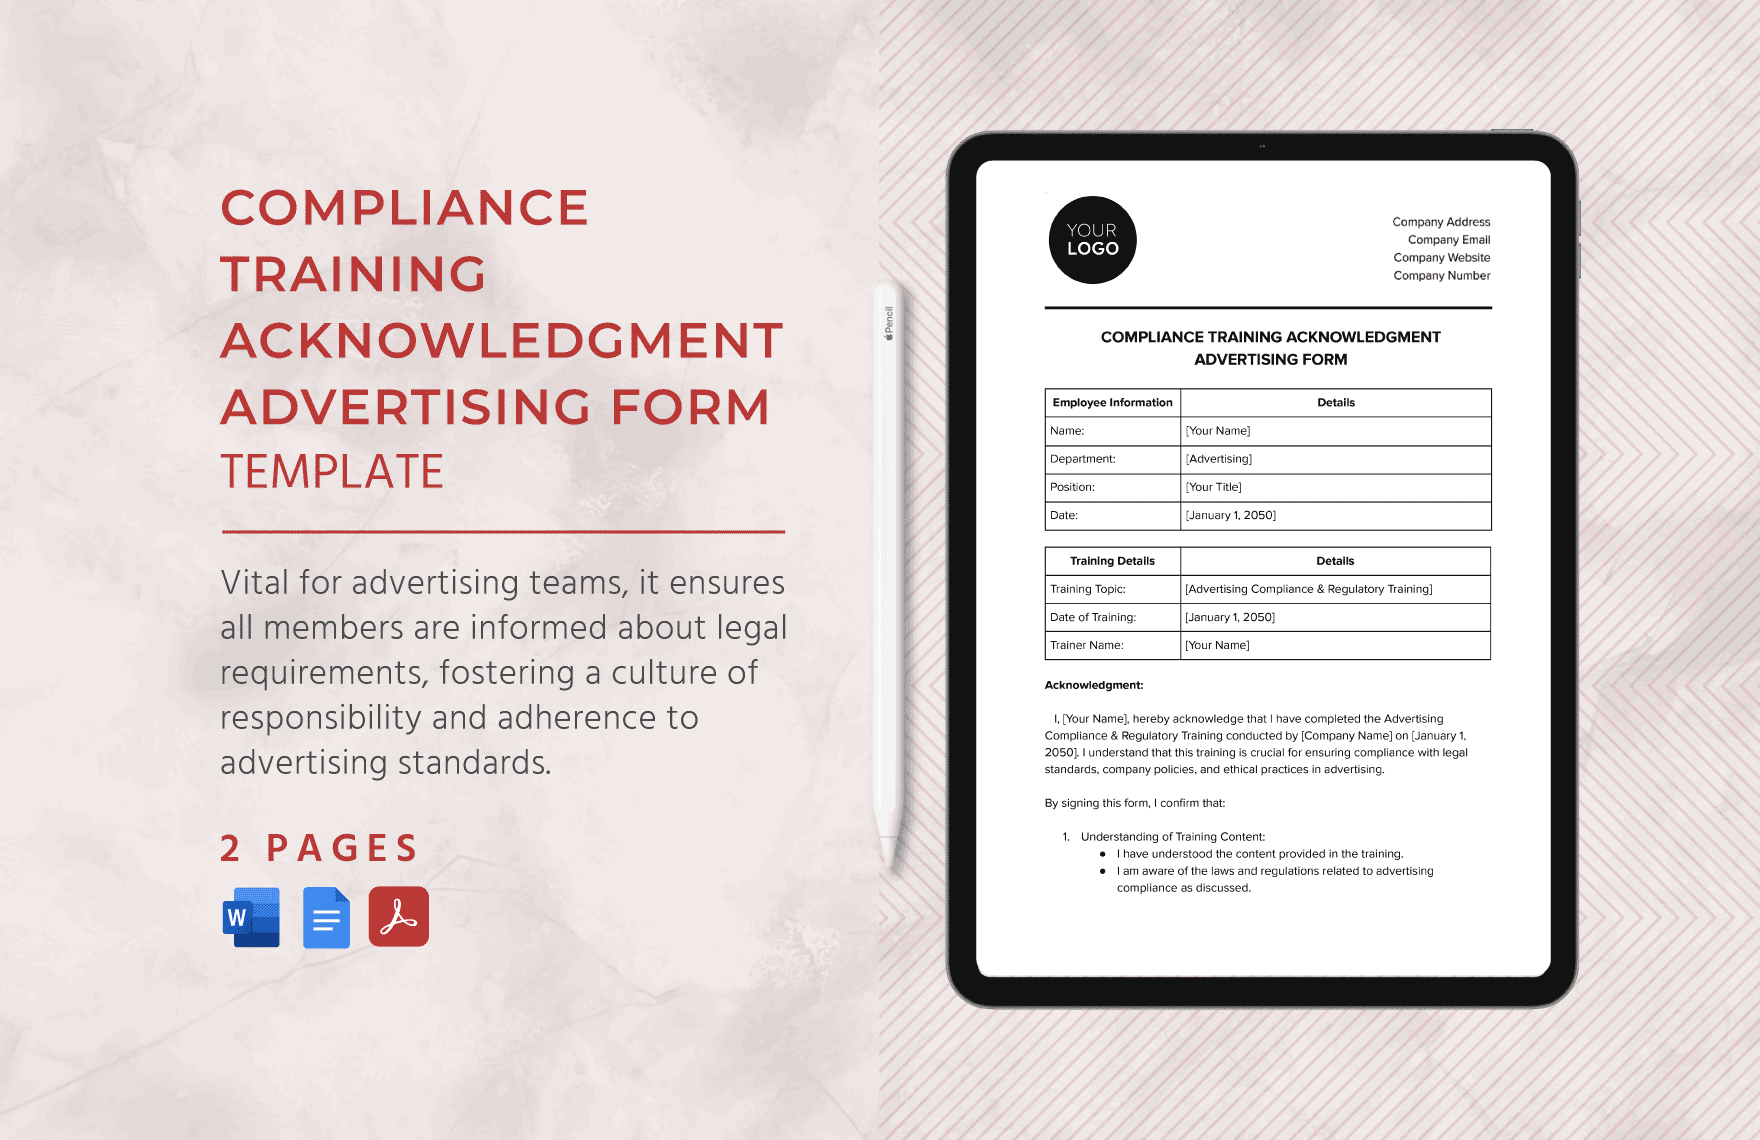 Compliance Training Acknowledgment Advertising Form Template in Word, Google Docs, PDF